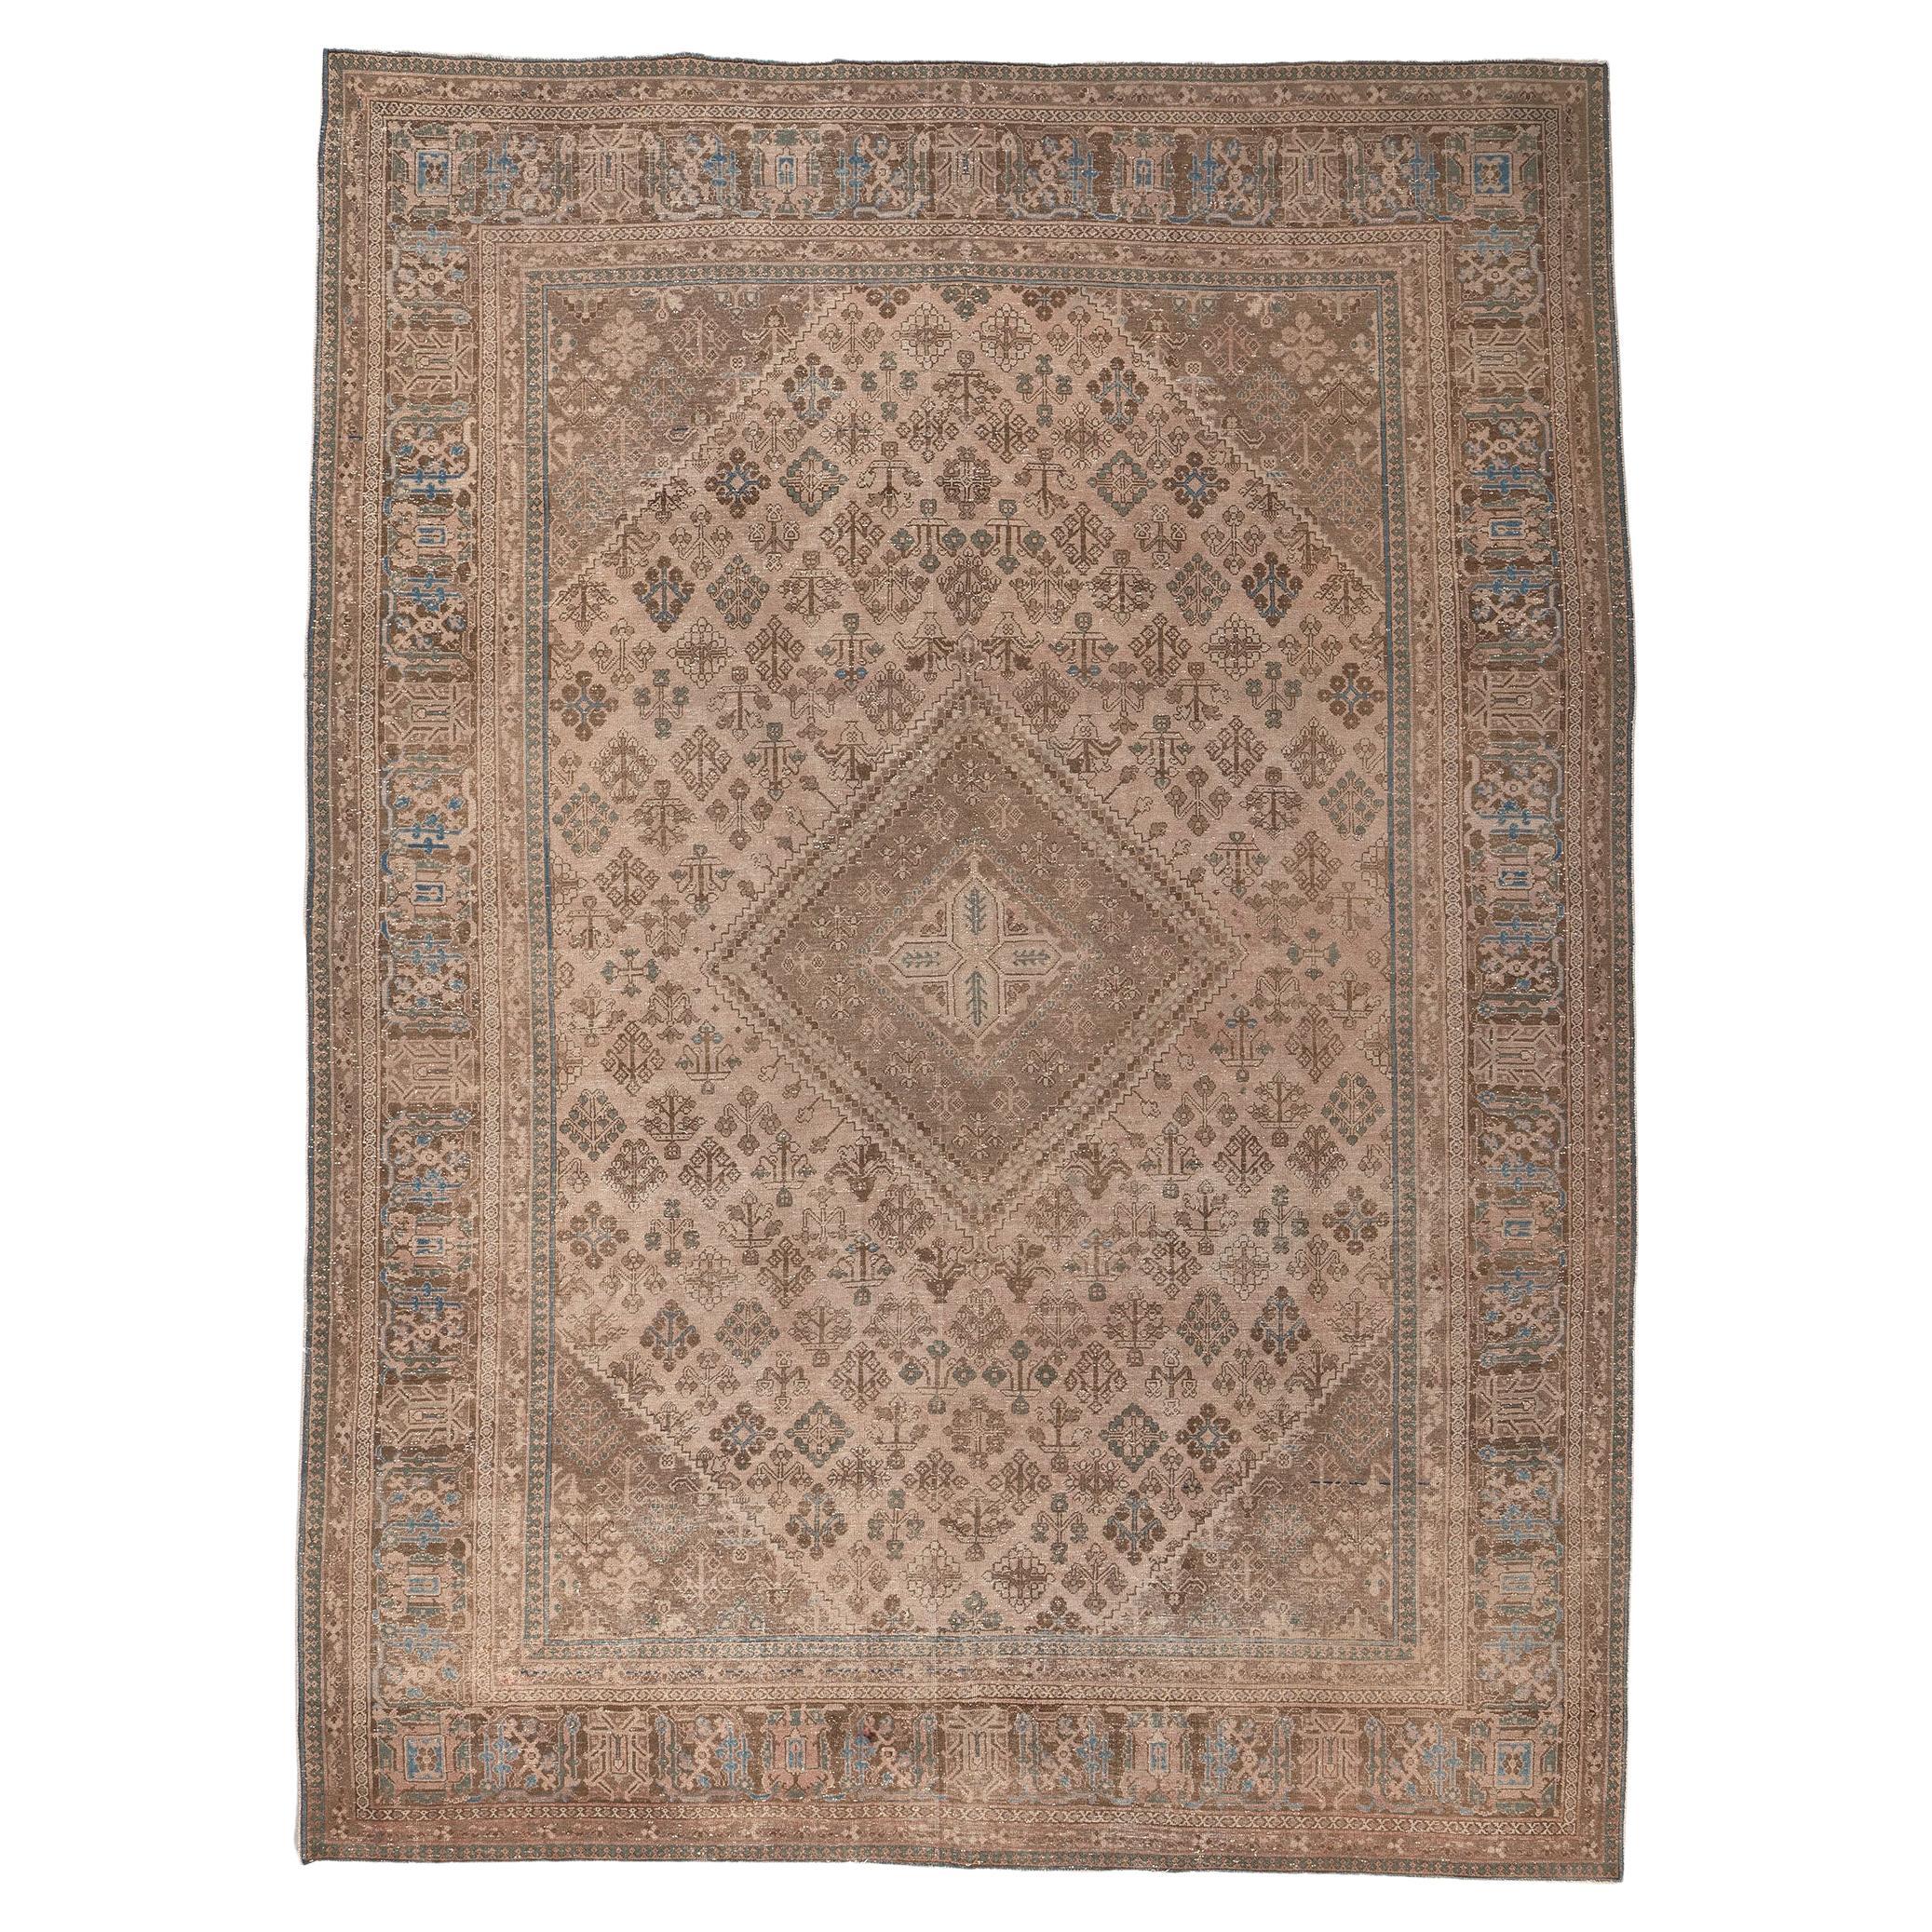 Distressed Antique Persian Rug, Understated Elegance Meets Relaxed Familiarity